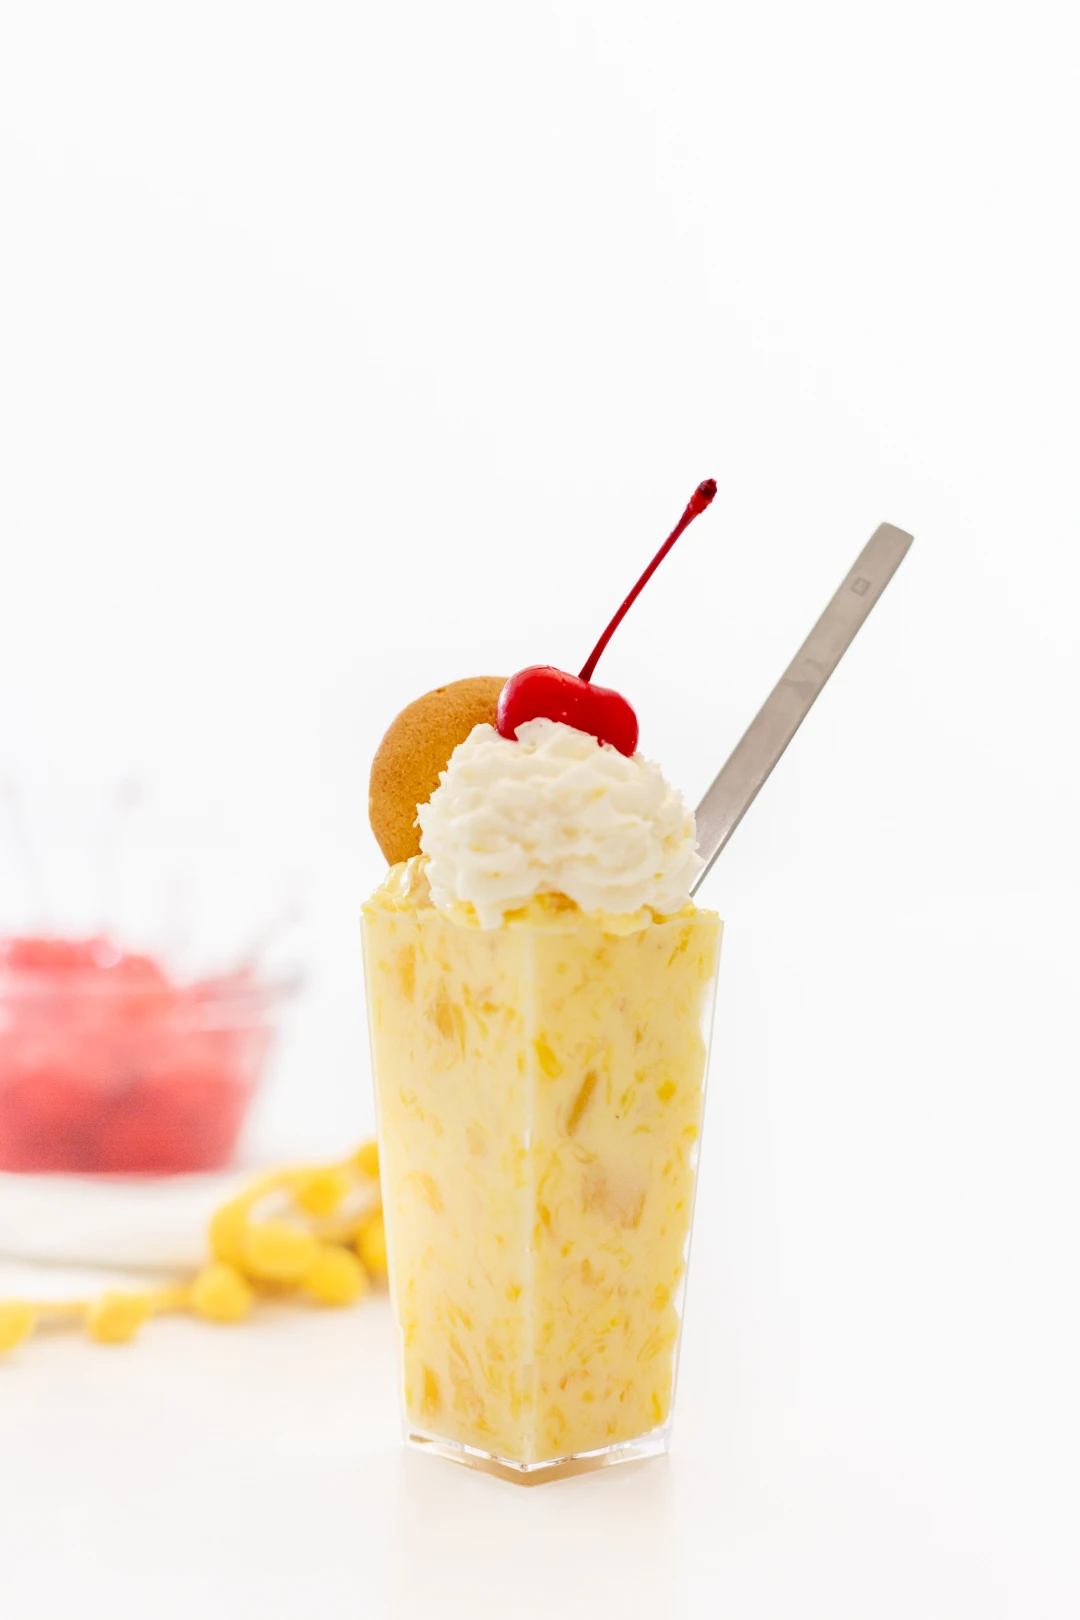 Pineapple Lush Dessert with 3 Ingredients. So Easy and Delish.